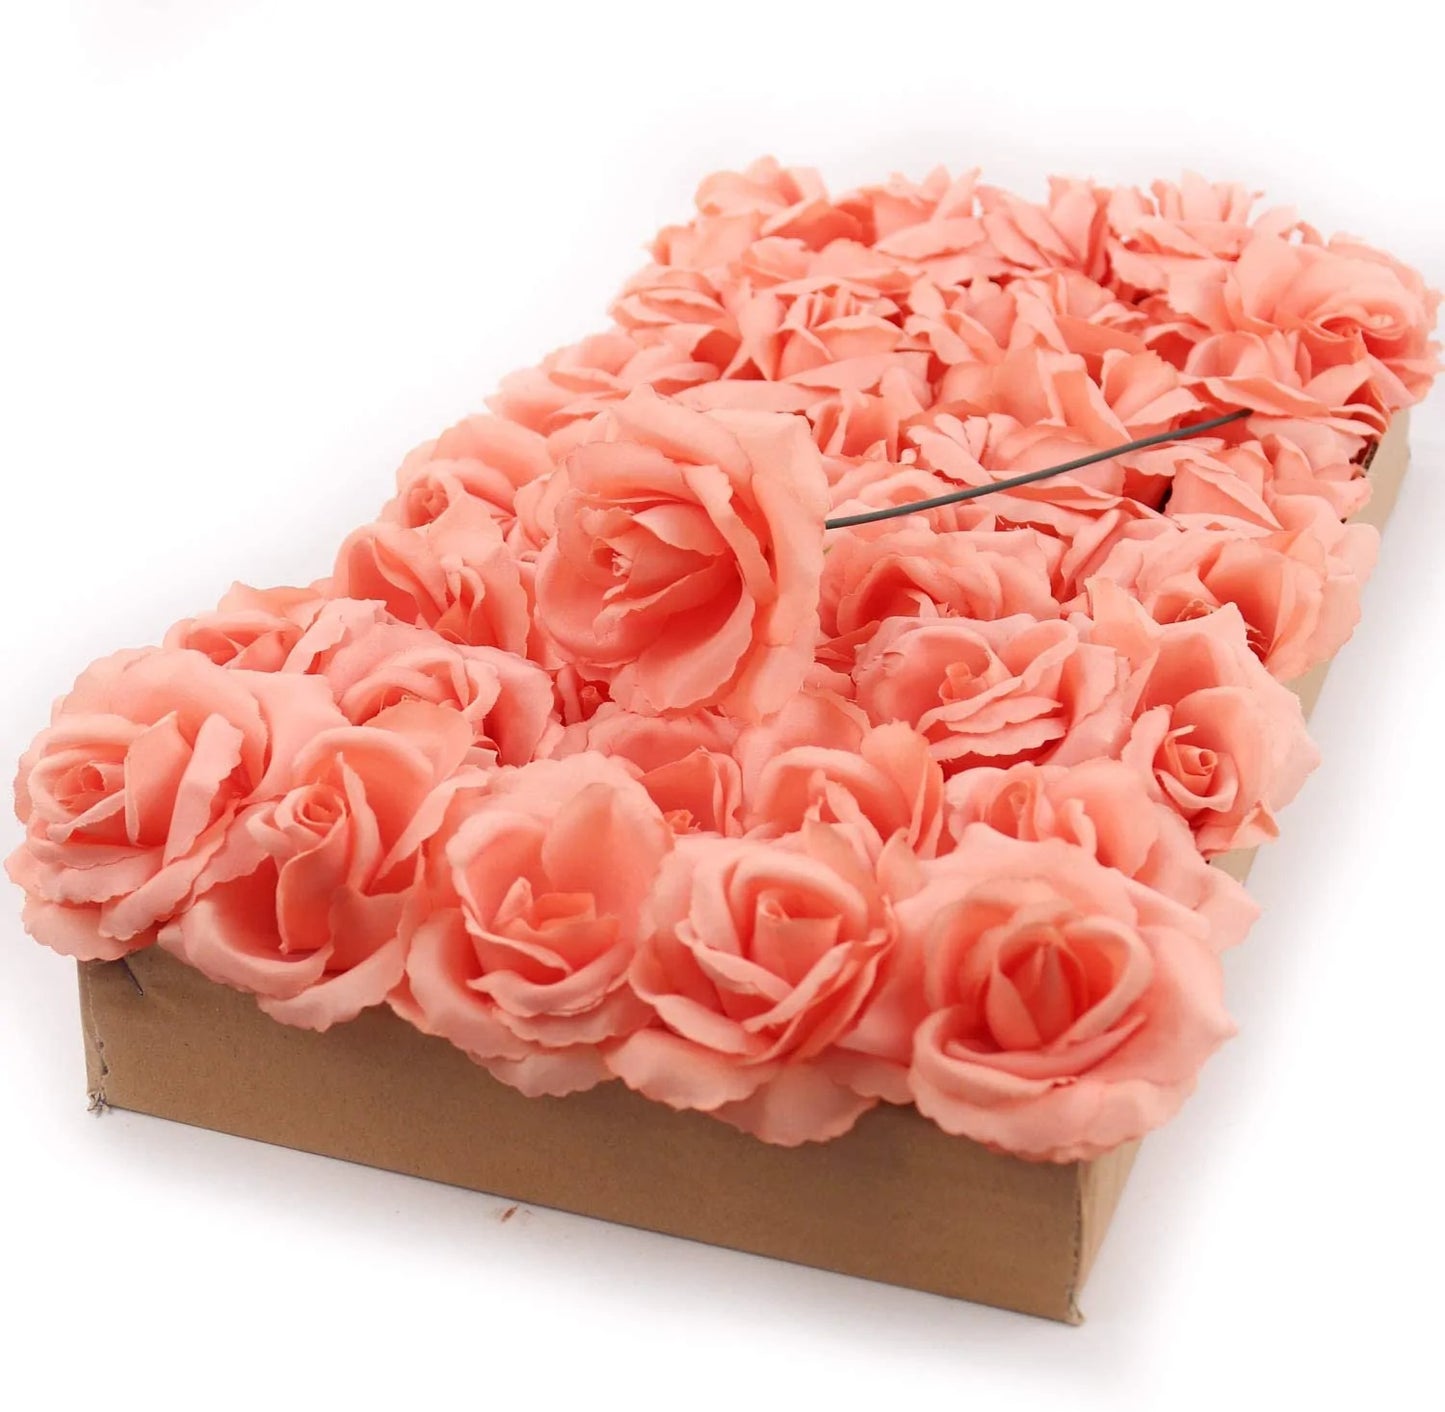 Serenity in Bloom: 50-Pack of Delicate Peach Artificial Rose Picks for Exquisite Floral Arrangements, Crafts, and Home Decor